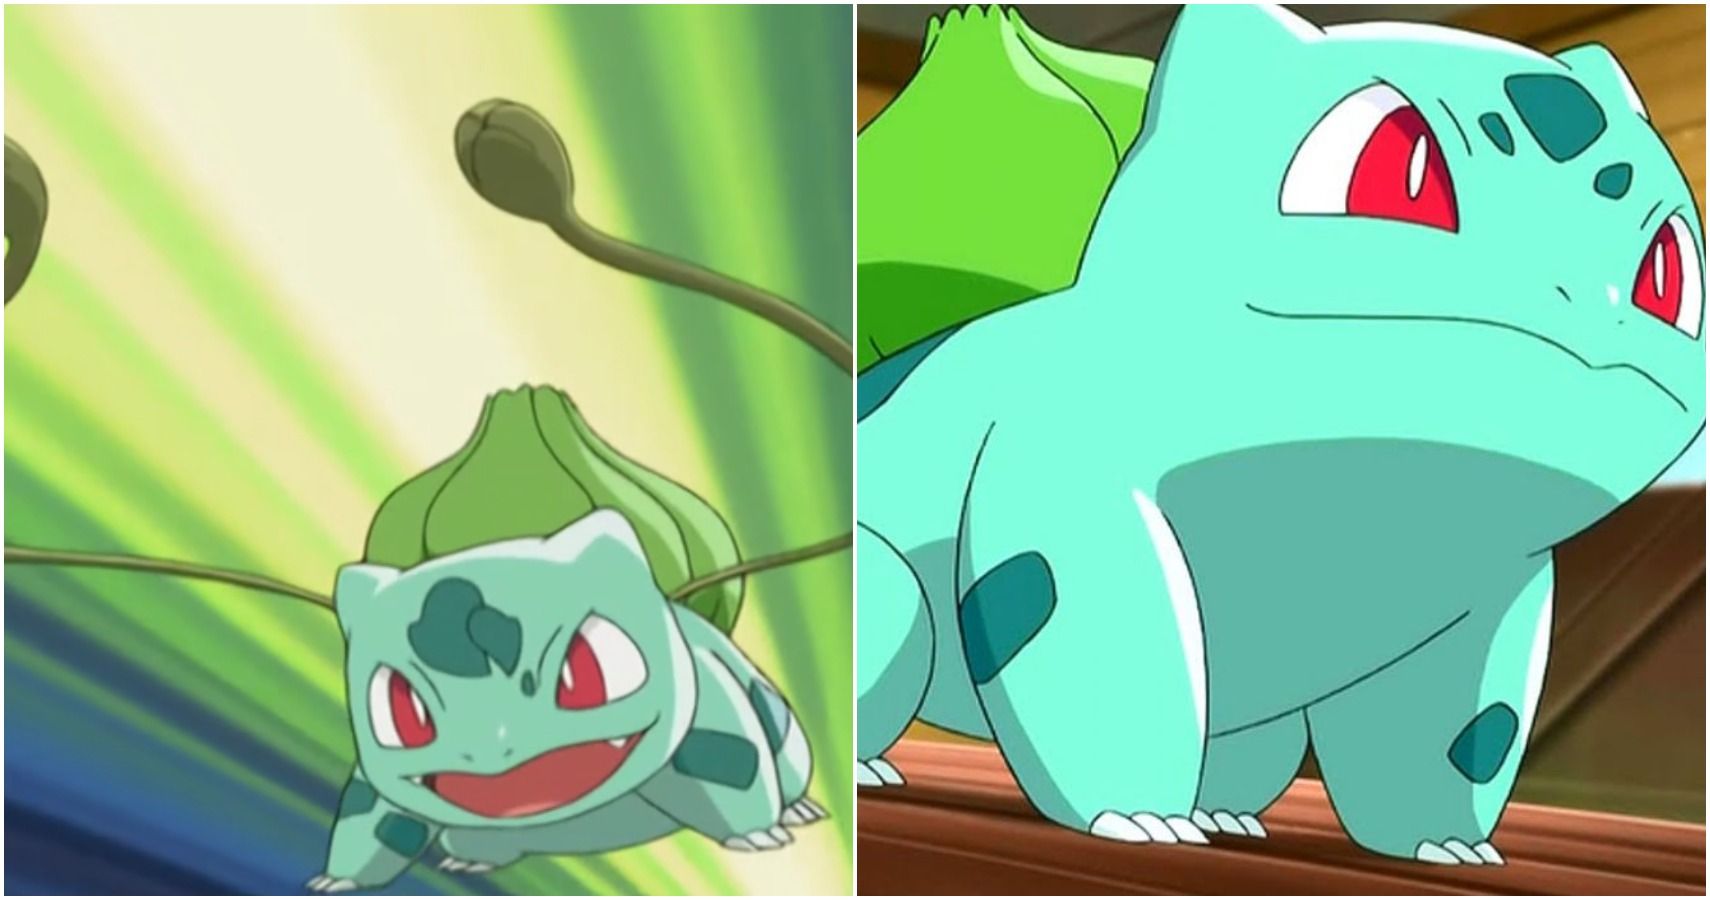 Pokémon: 10 Things You Didn't Know About Bulbasaur